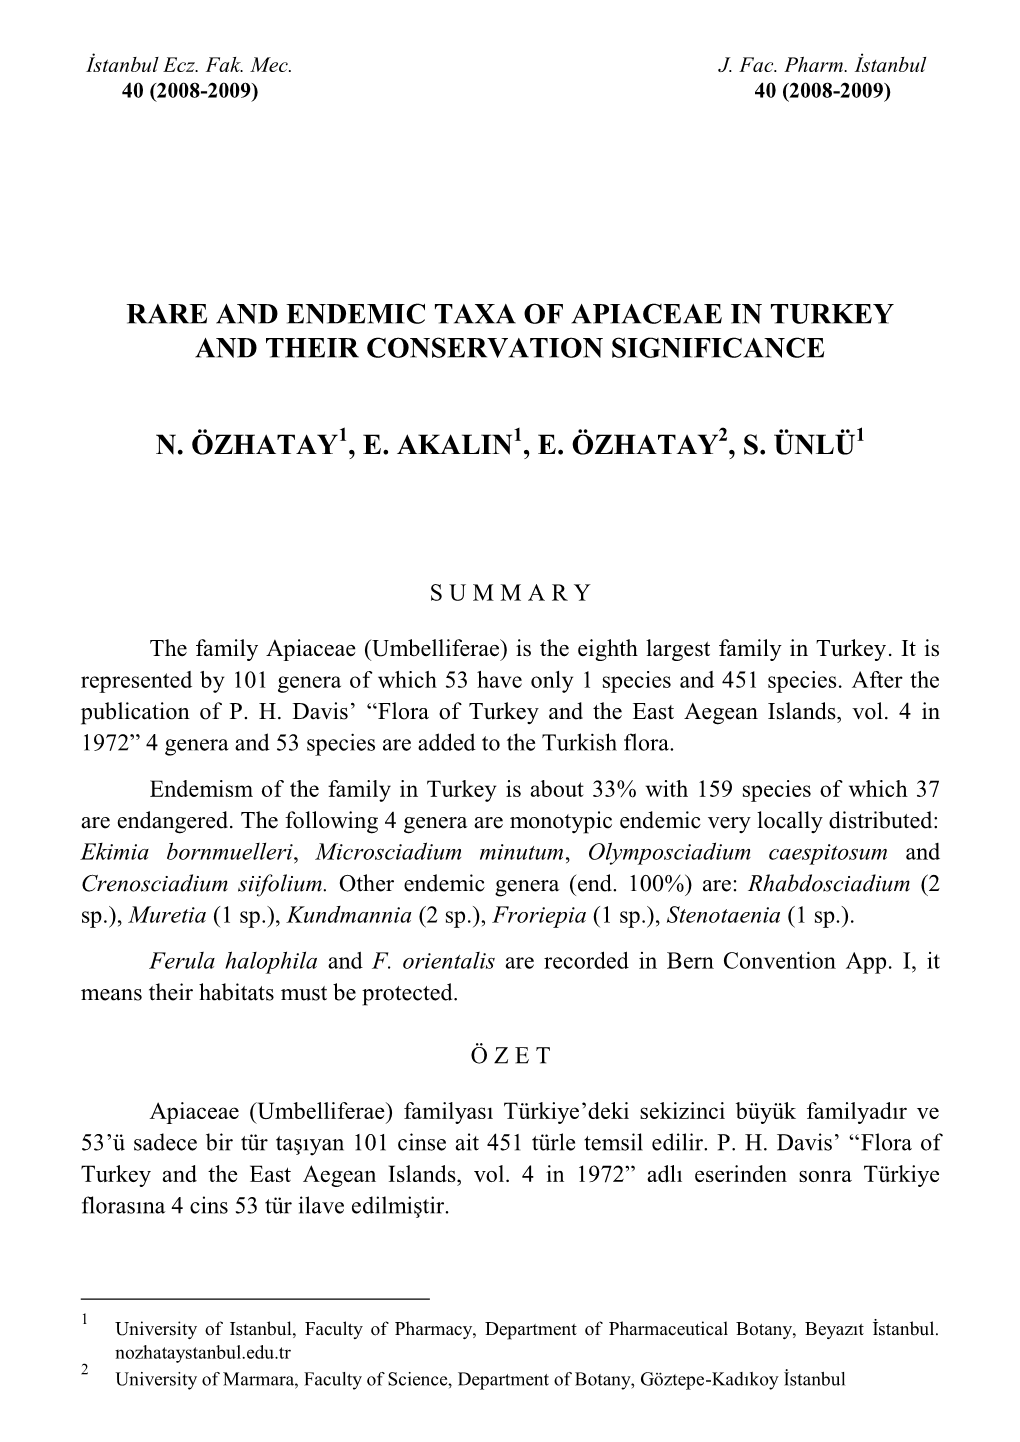 Rare and Endemic Taxa of Apiaceae in Turkey and Their Conservation Significance